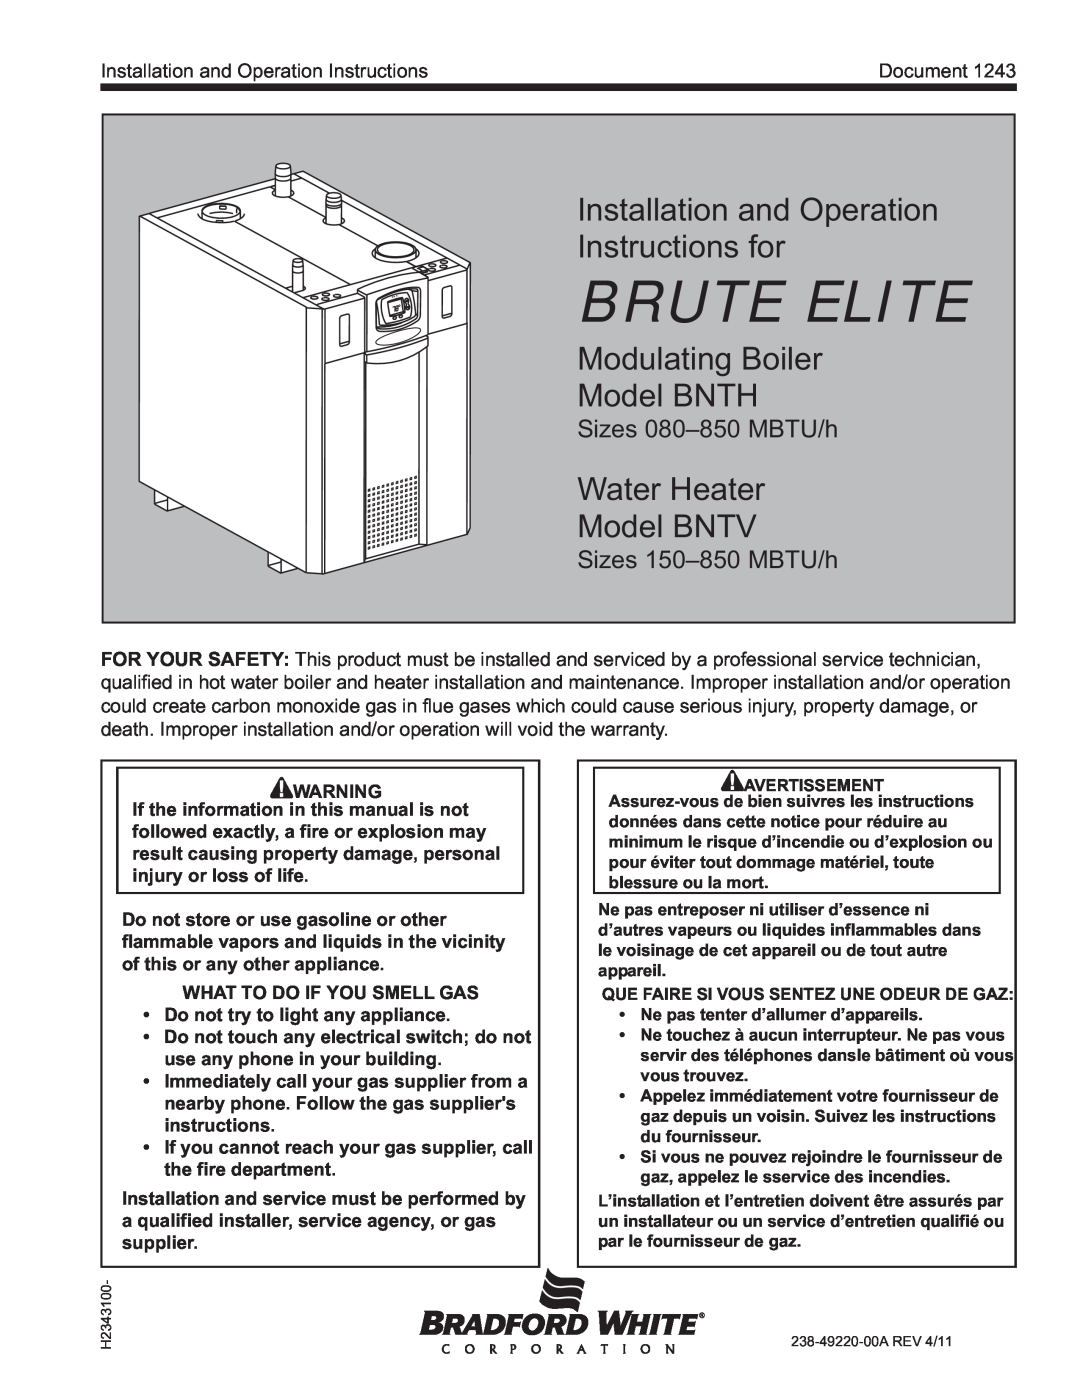 Bradford-White Corp warranty Installation and Operation Instructions, Document, Brute Elite, Water Heater Model BNTV 